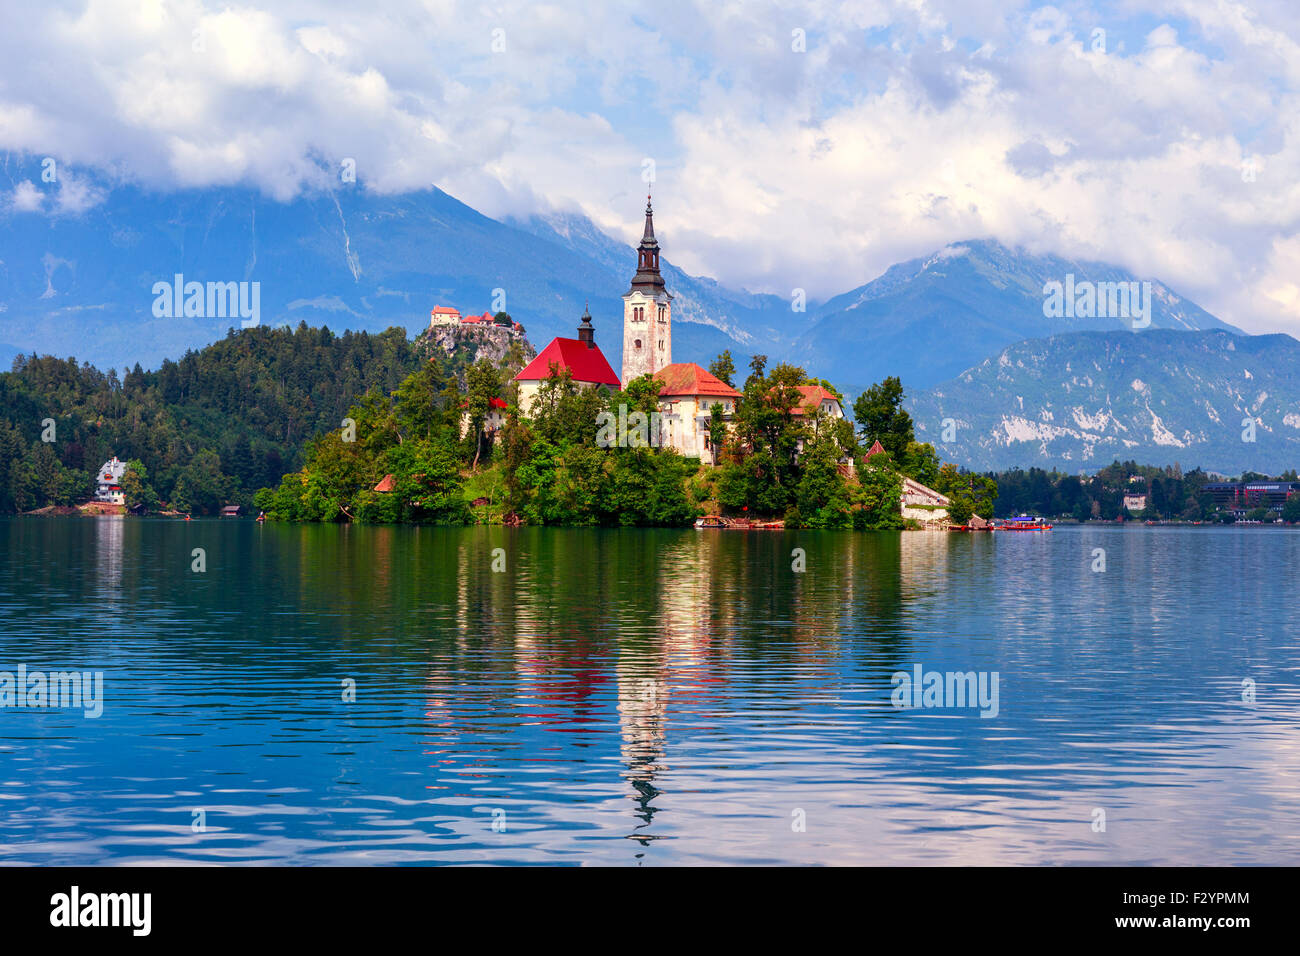 Bled with lake, island, castle and mountains in background, Slovenia, Europe Stock Photo